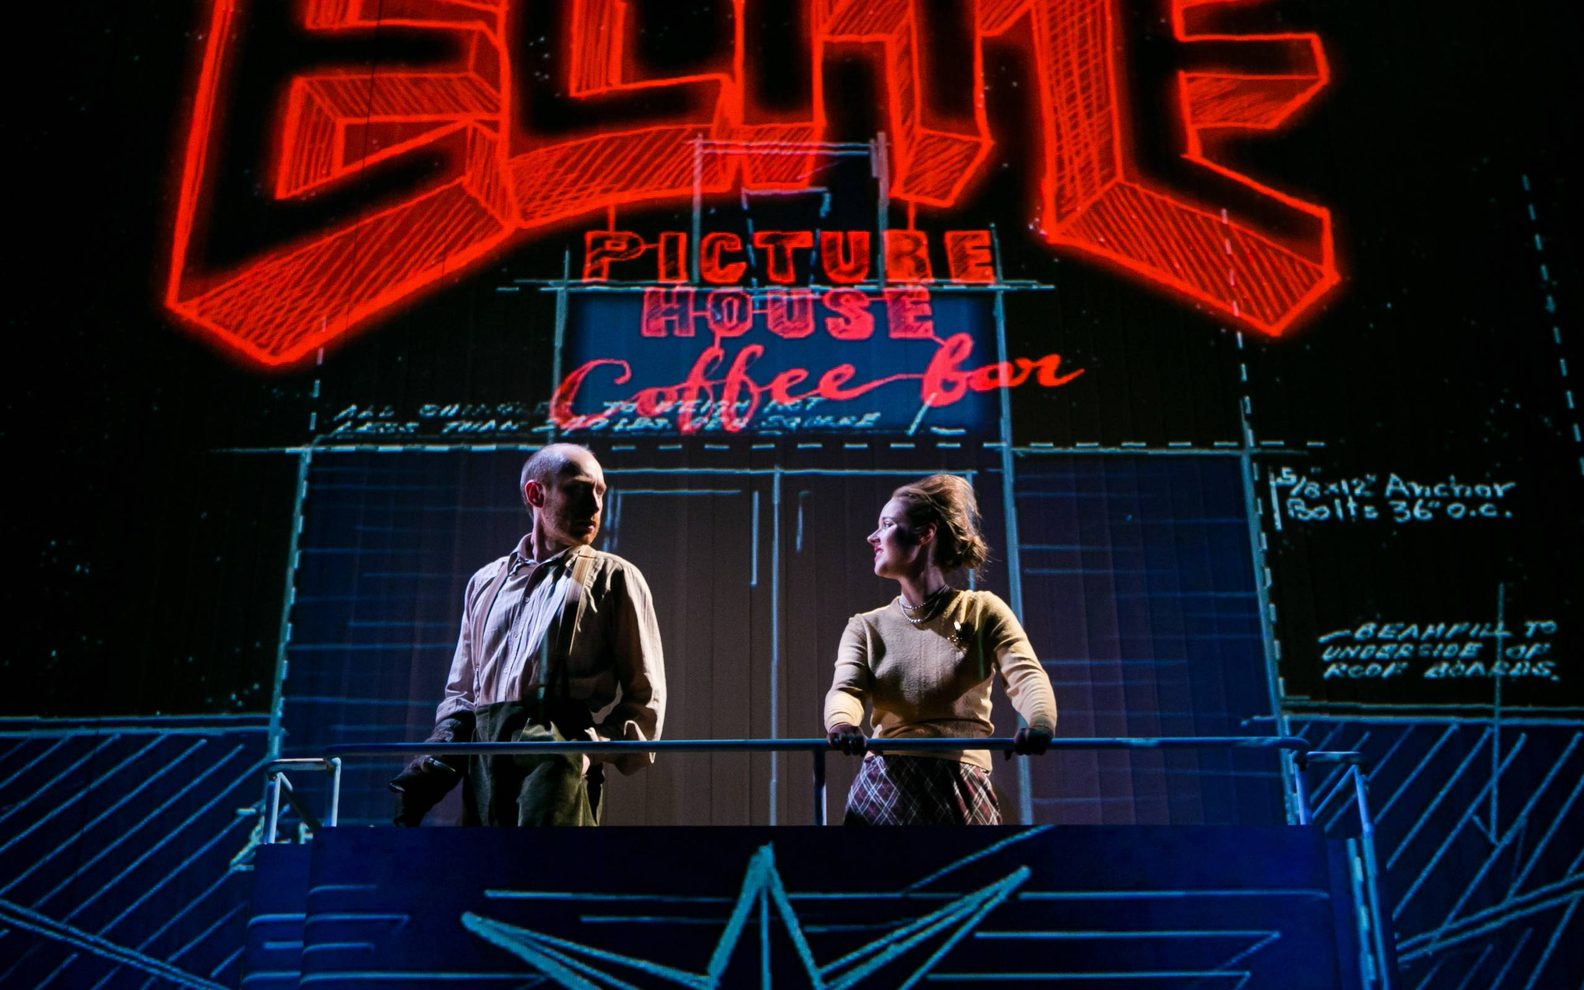 A theatrical production. Two people stand on a platform looking at each other. Writing is projected on the wall behind them that says 'Picture House coffee bar'